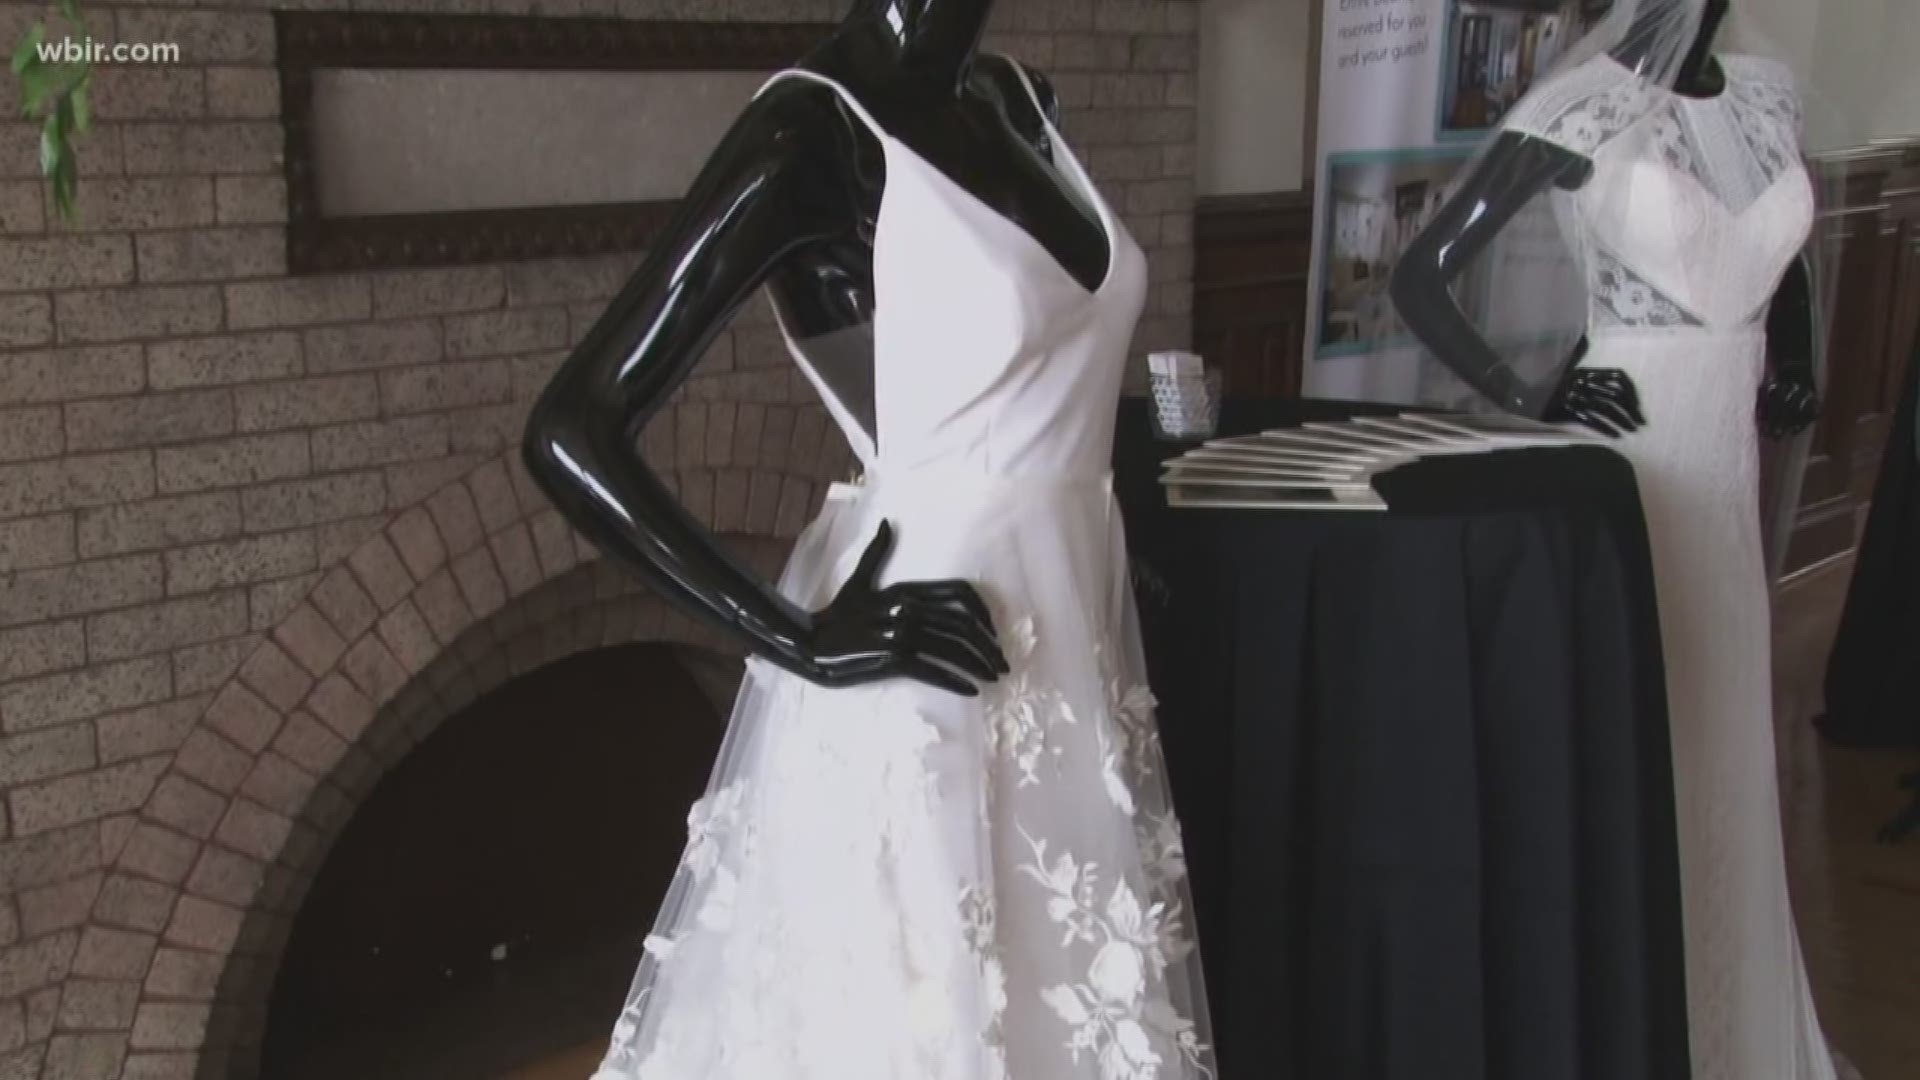 Local vendors came together to launch the first all LGBTQ-friendly wedding exposition in Knoxville.